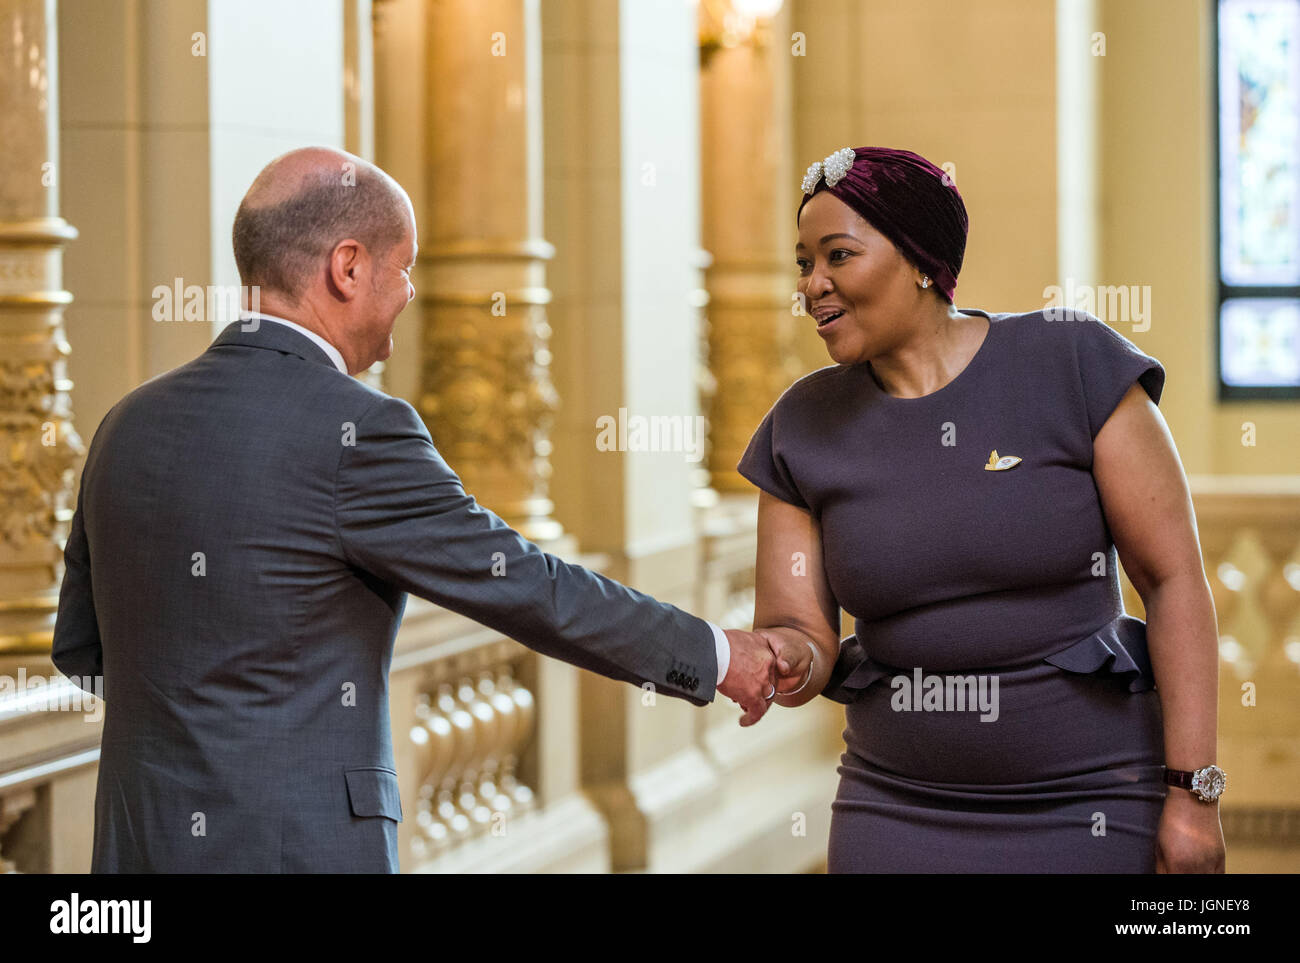 Olaf Scholz, the mayor of Hamburg, greets Thobeka Madiba, the wife of the South African president, during a G20 summit partners' programme event  in the city hall in Hamburg, Germany, 8 July 2017. Photo: Jens Büttner/dpa-Zentralbild/dpa Stock Photo